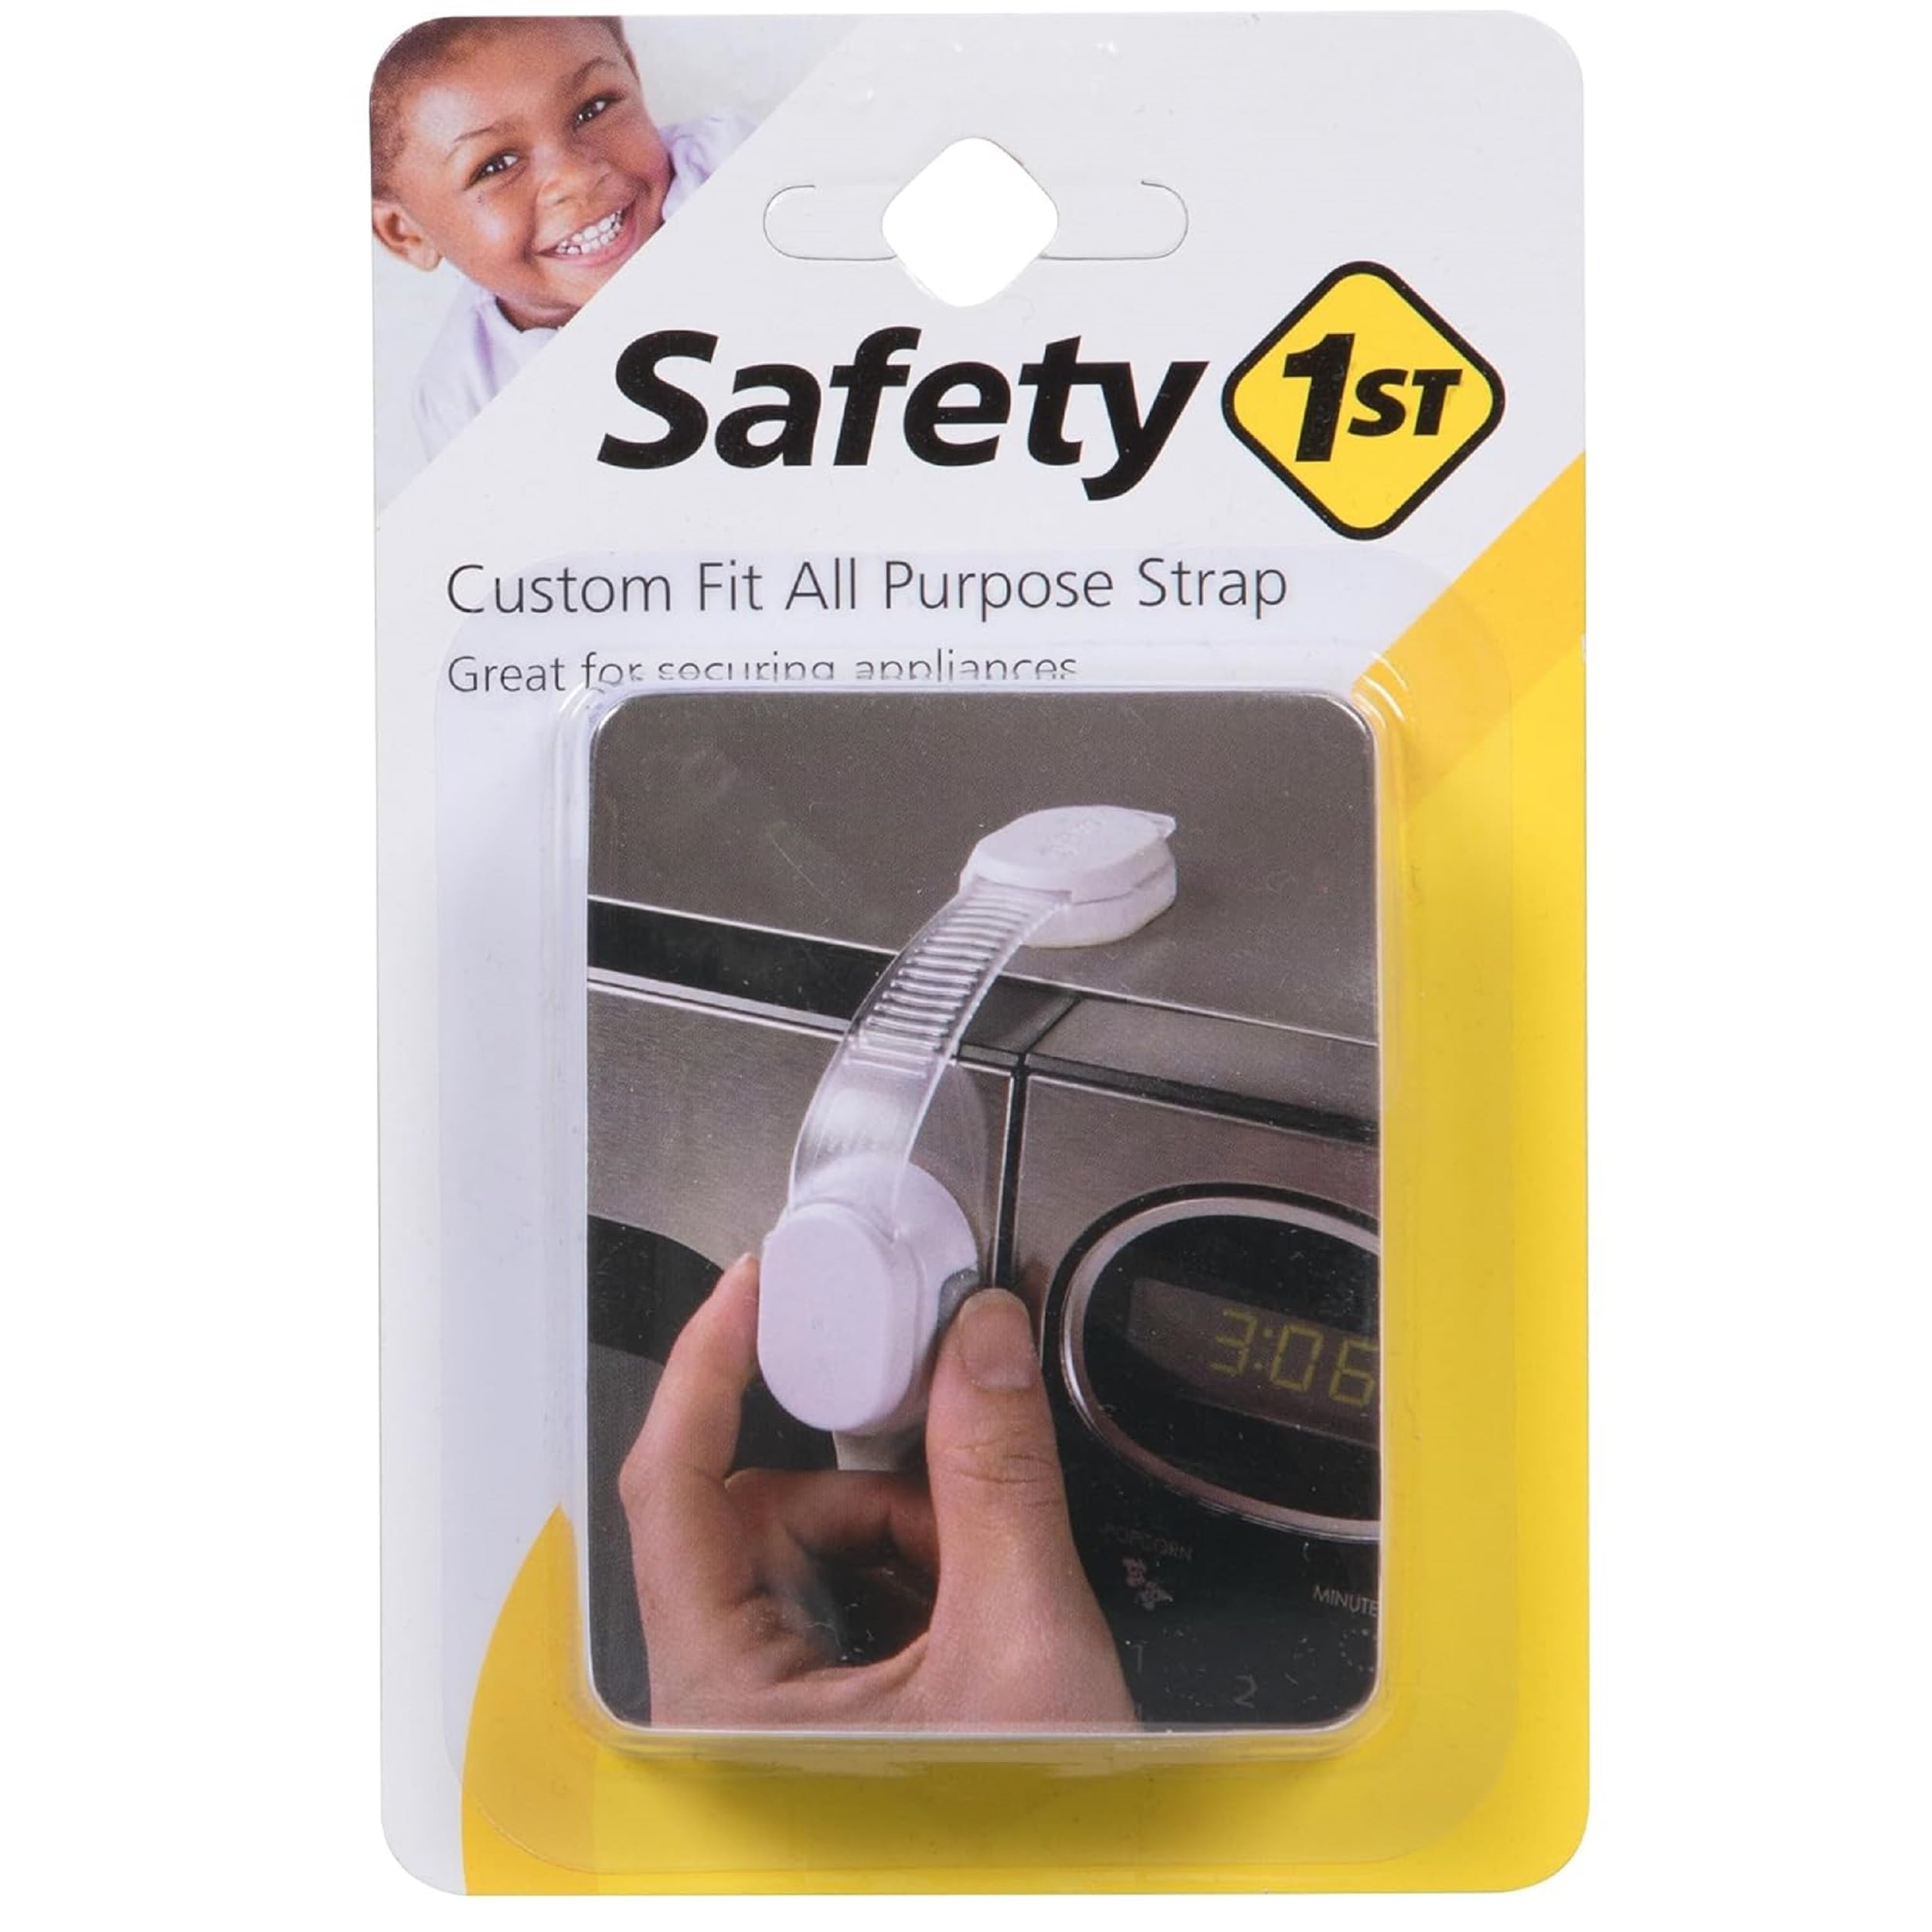 Safety 1ˢᵗ Custom Fit All Purpose Strap (Clear) $1.91 + Free Shipping w/ Prime or on $35+